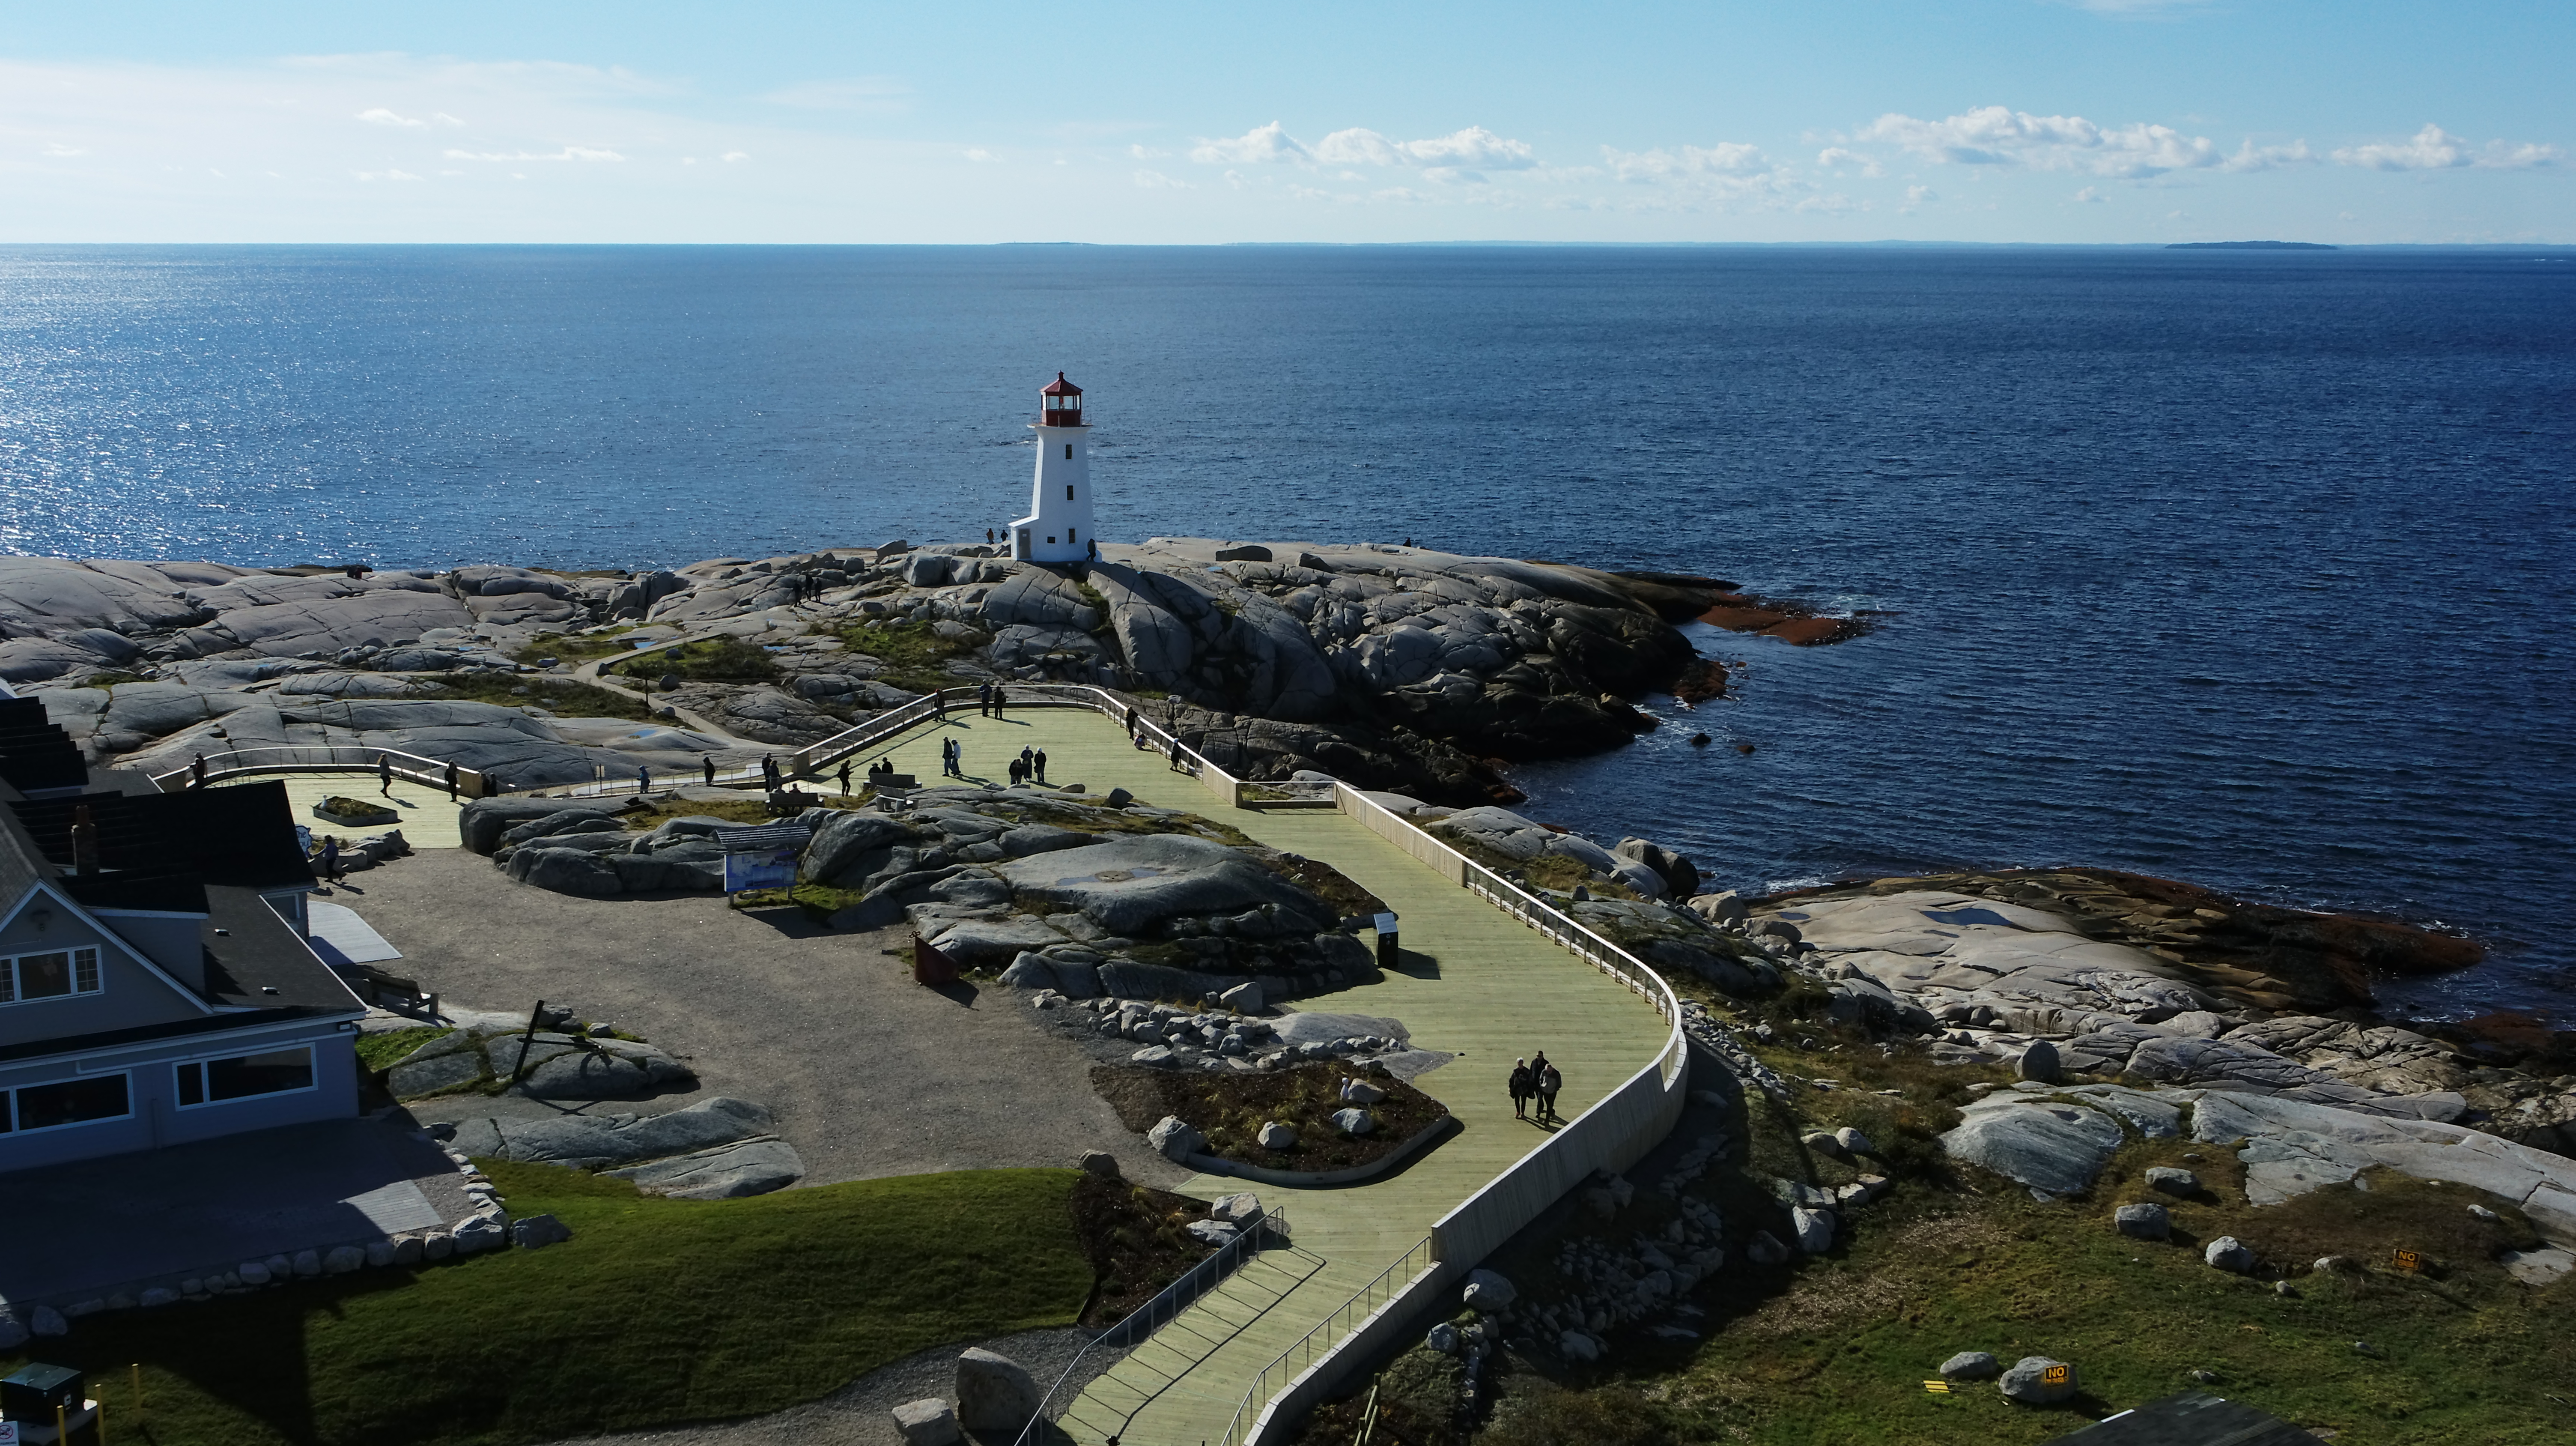 Aerial view of the Peggy's Cove viewing deck. The viewing deck is a large, wooden accessible platform that wraps around the large rocks that surround the red and white lighthouse, which overlooks the ocean. There is a building near the trai.